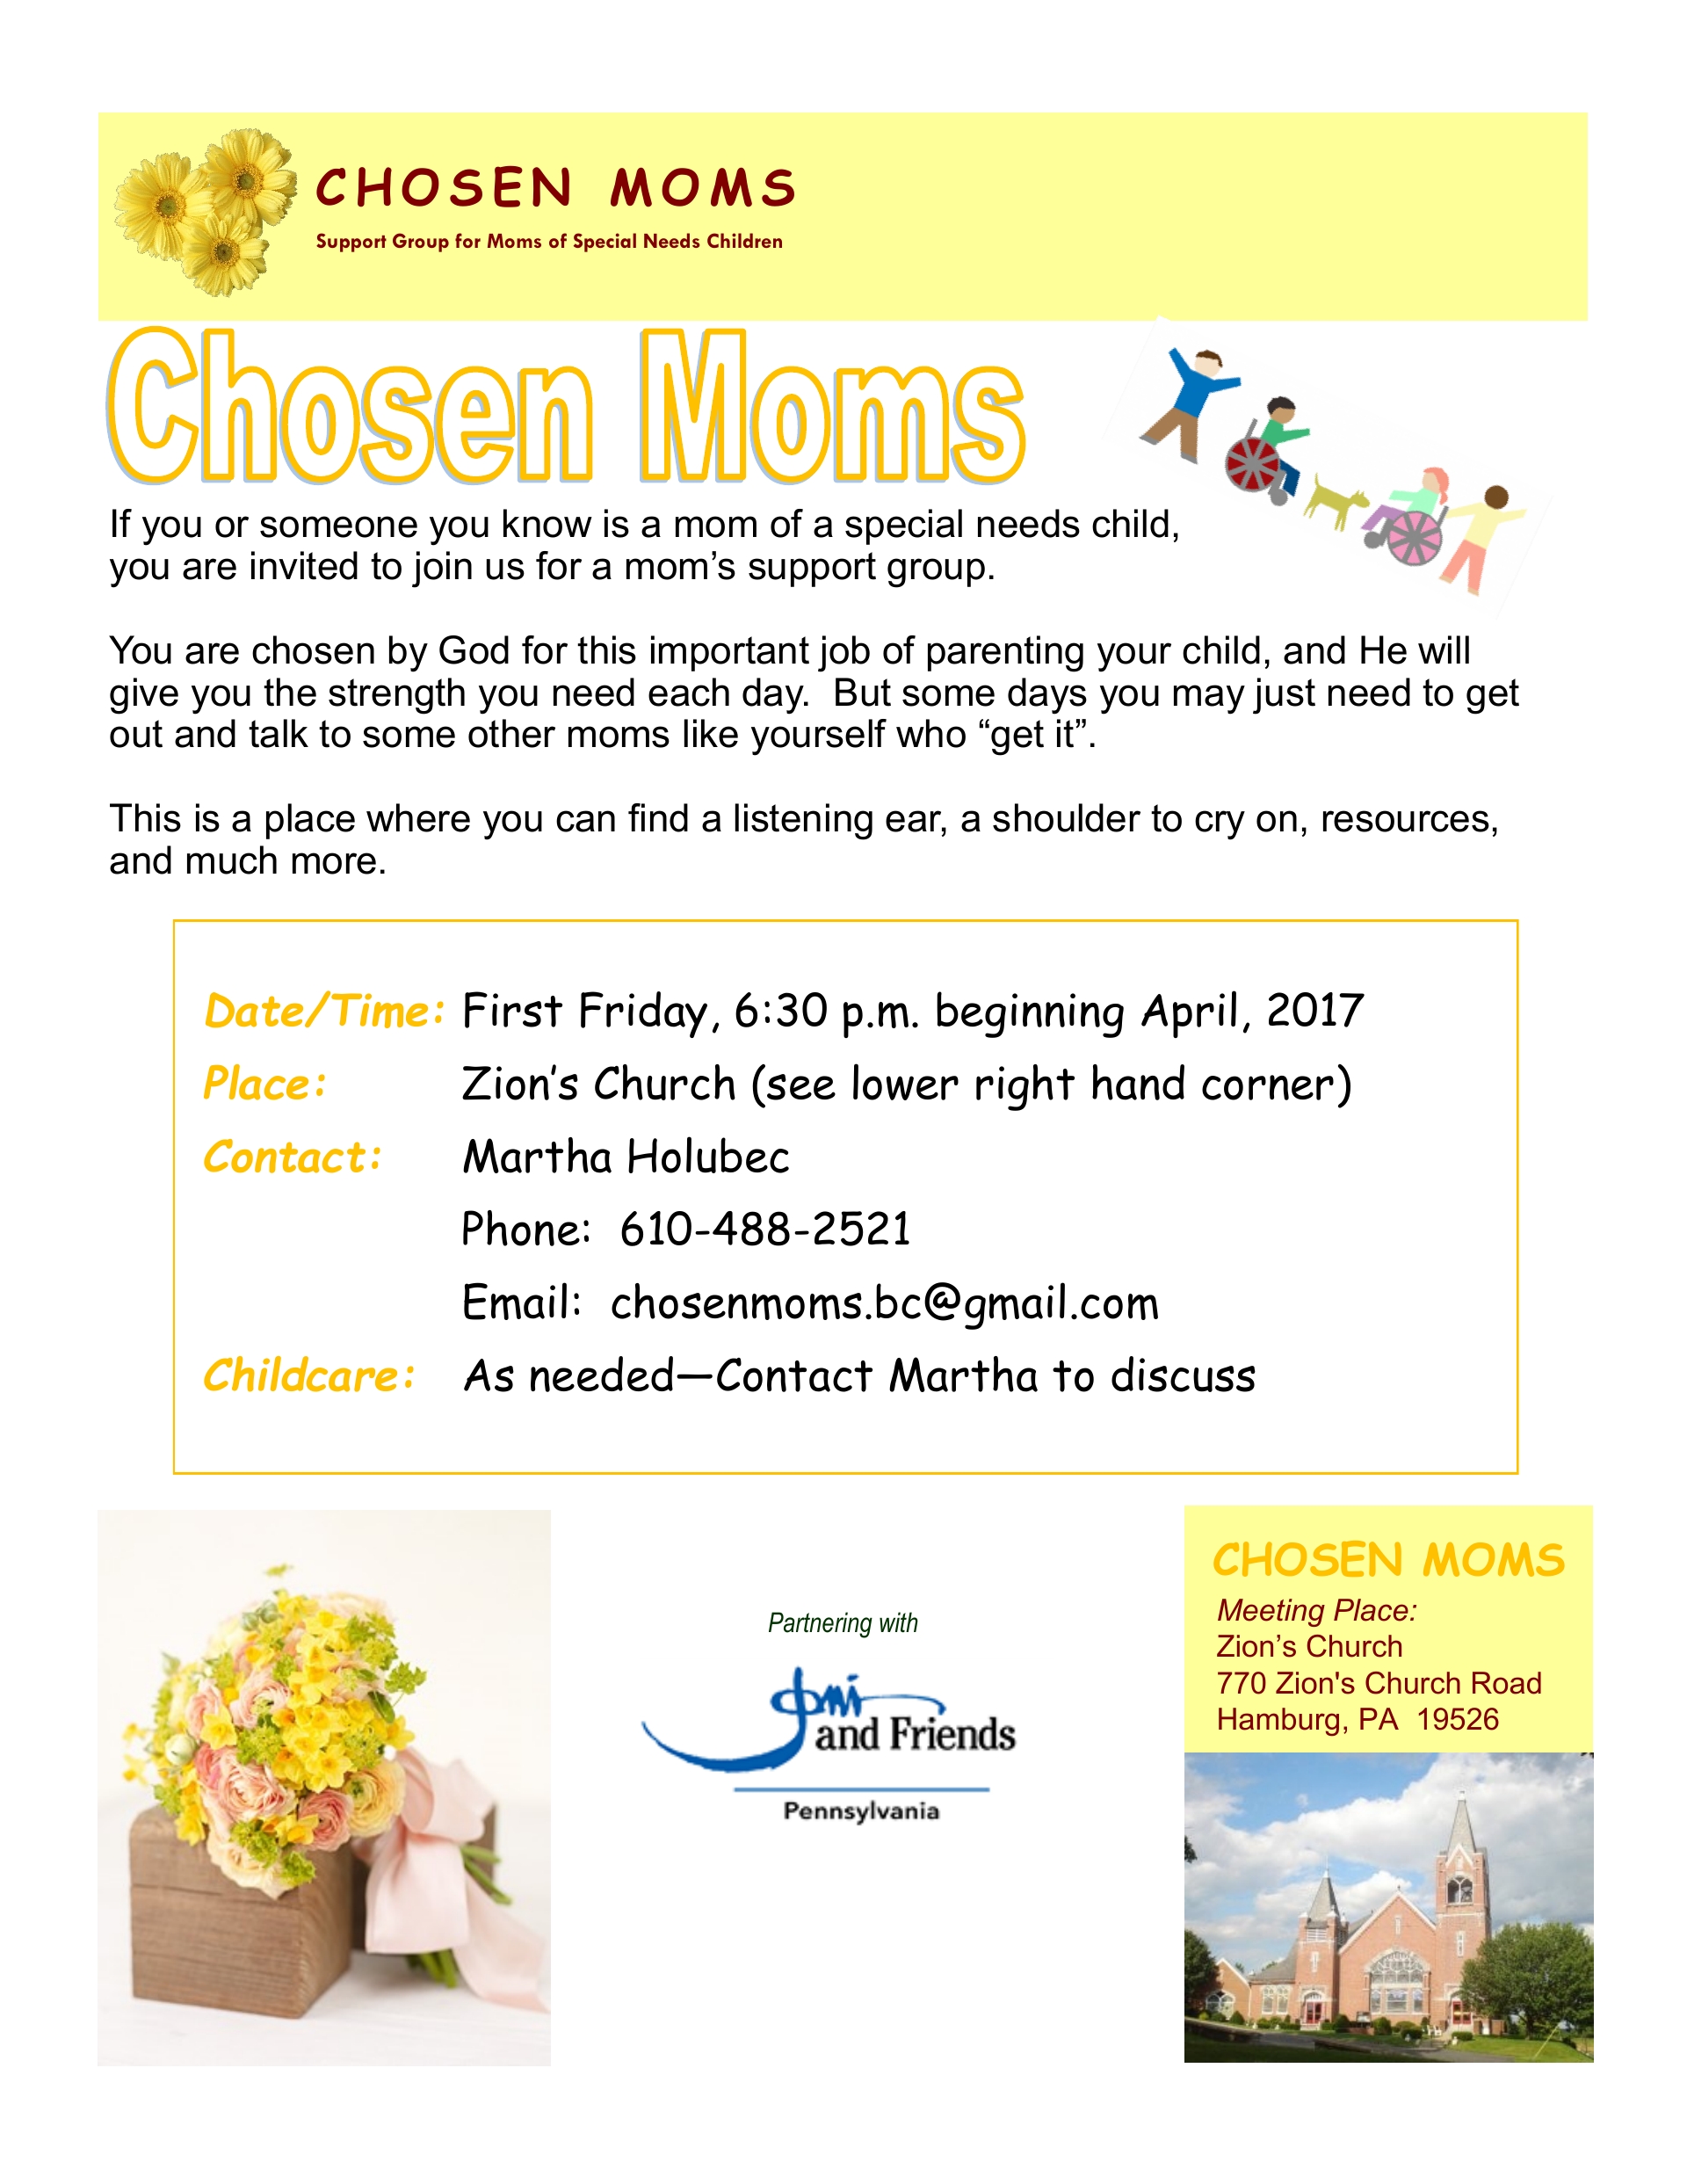 CHOSEN MOMS SUPPORT GROUP  (Moms of children with special needs)